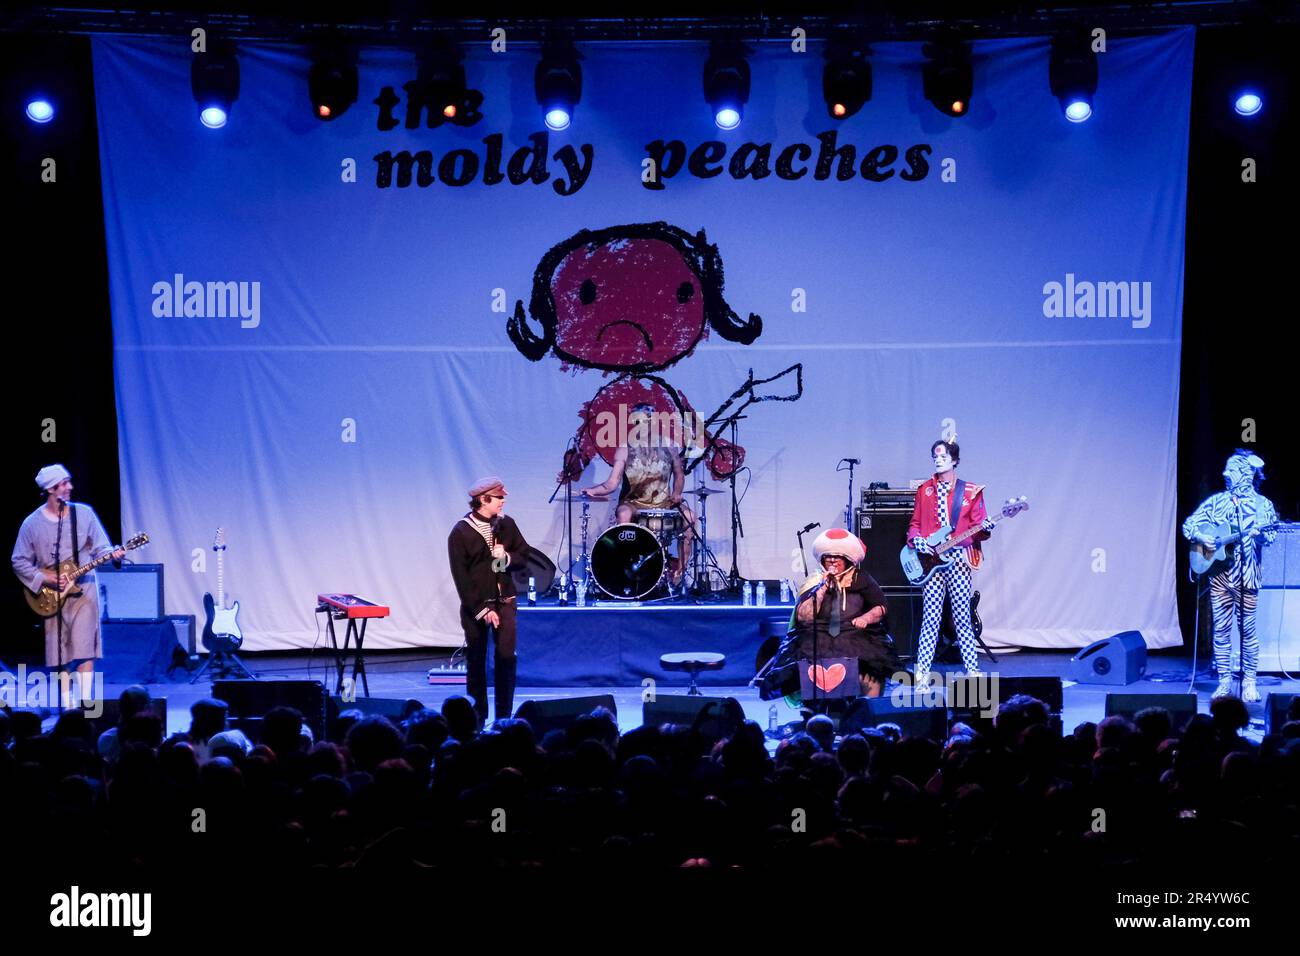 London, UK. 29th May, 2023. (L-R) Guitarist Jack Deshel, American singer-songwriter and lead vocalist Adam Green, drummer Brent Coles, vocalist Kimya Dawson, bass player Steve Mertens, and guitarist Toby Goodshank with American lo-fi indie folk rock band The Moldy Peaches performing live at The Roundhouse, London, UK Adam Green, and Kimya Dawsom with New York alternative indie band The Moldy Peaches reunite to perform for the first time as a band in 20 years. (Photo by Dawn Fletcher-Park/SOPA Images/Sipa USA) Credit: Sipa USA/Alamy Live News Stock Photo